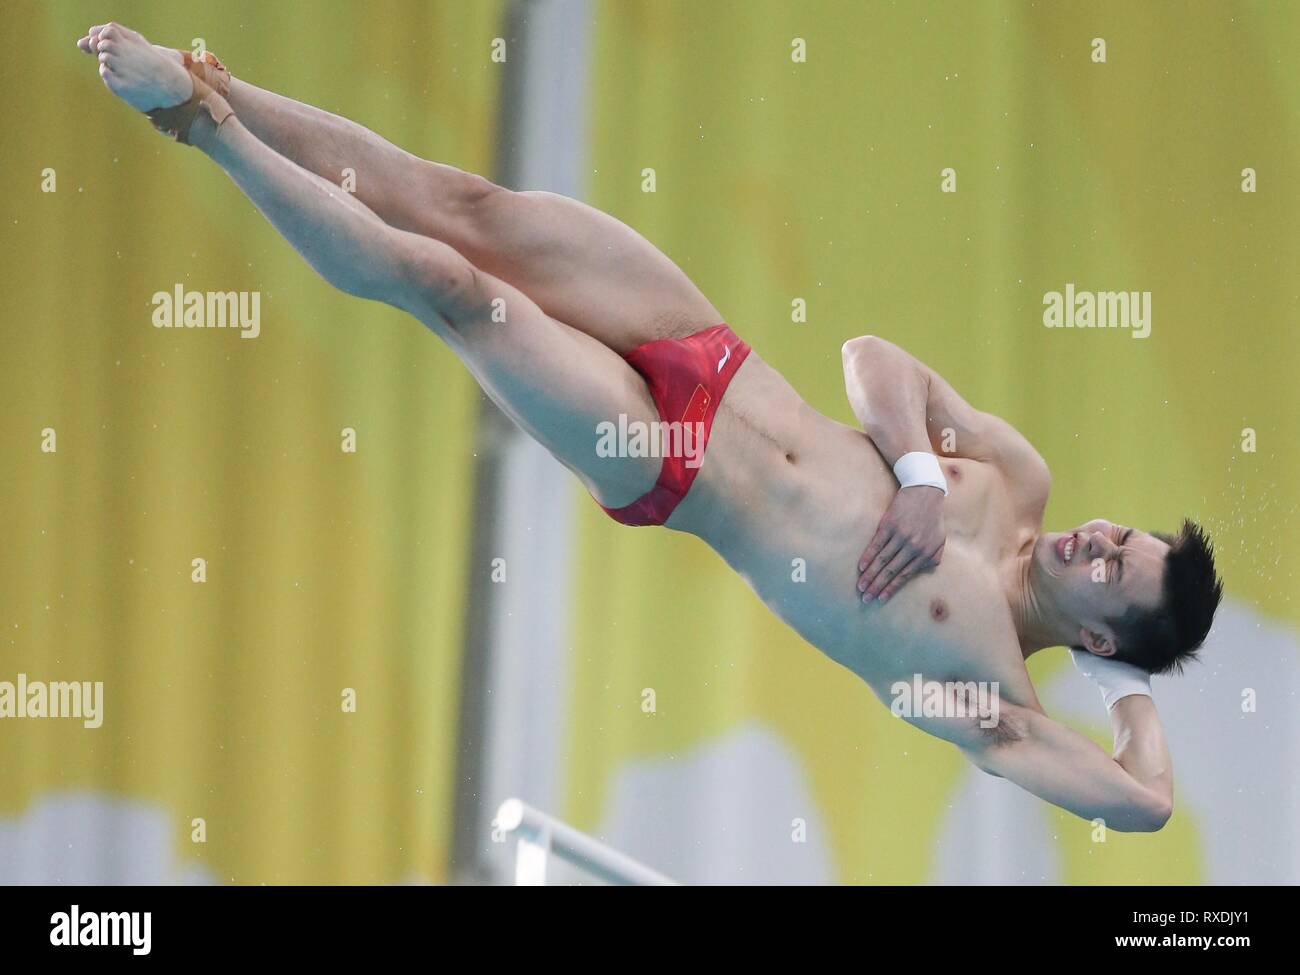 Beijing, China. 9th Mar, 2019. Chen Aisen of China competes during the men's 10m platform final at the FINA Diving World Series 2019 at the National Aquatics Center in Beijing, capital of China, March 9, 2019. Credit: Jia Haocheng/Xinhua/Alamy Live News Stock Photo